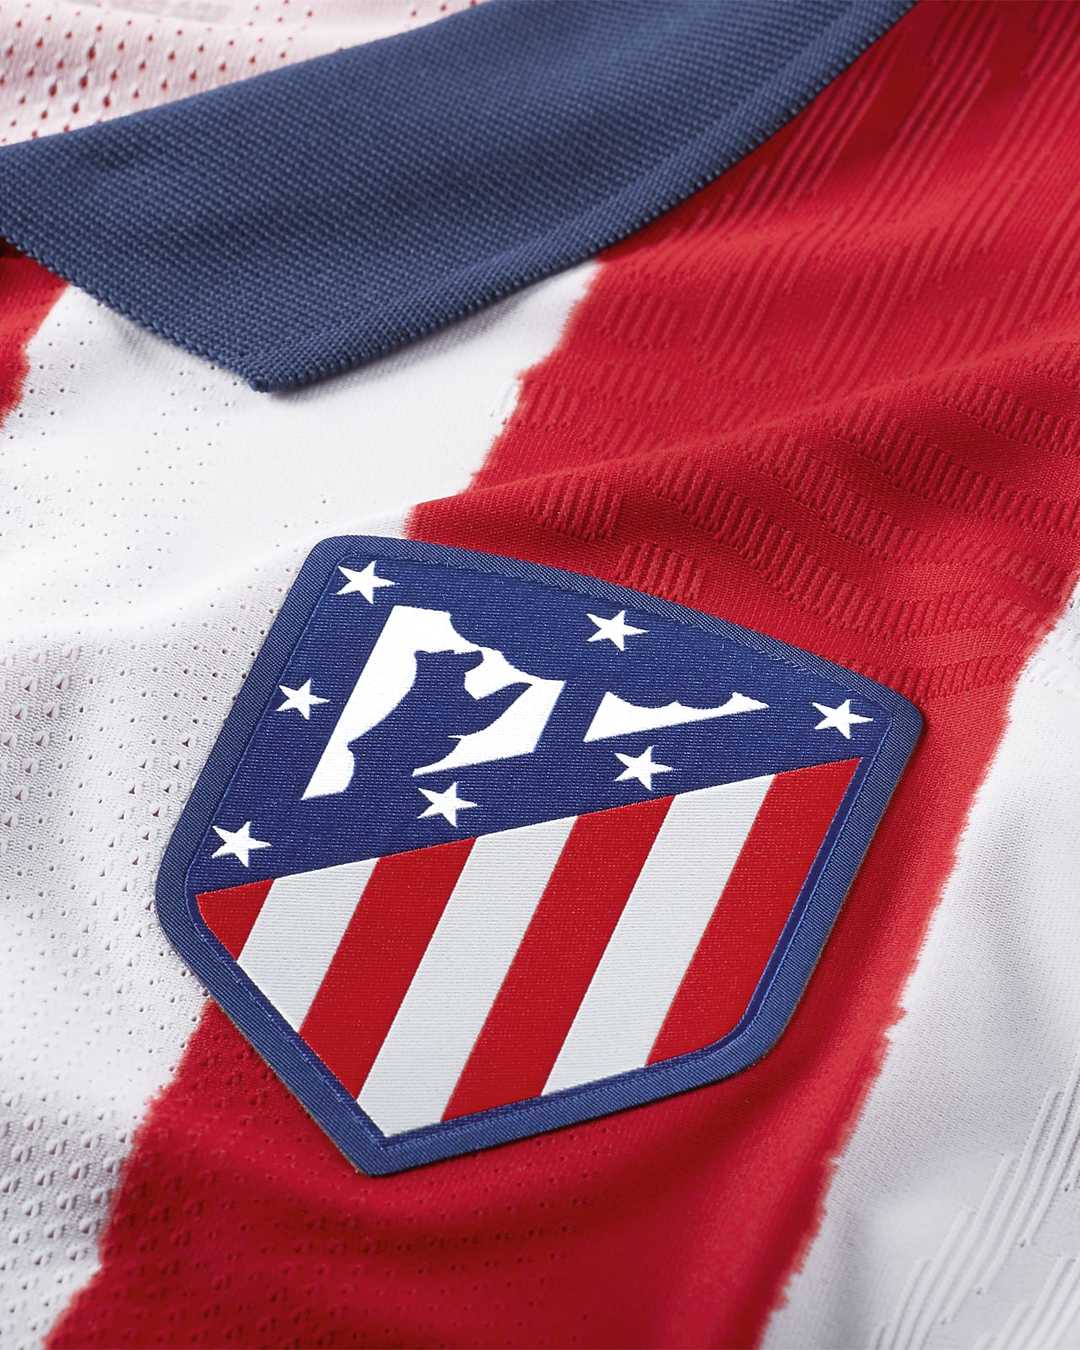 20/21 Atlético de Madrid Home Red&White Stripes Men Jersey Jersey - Click Image to Close